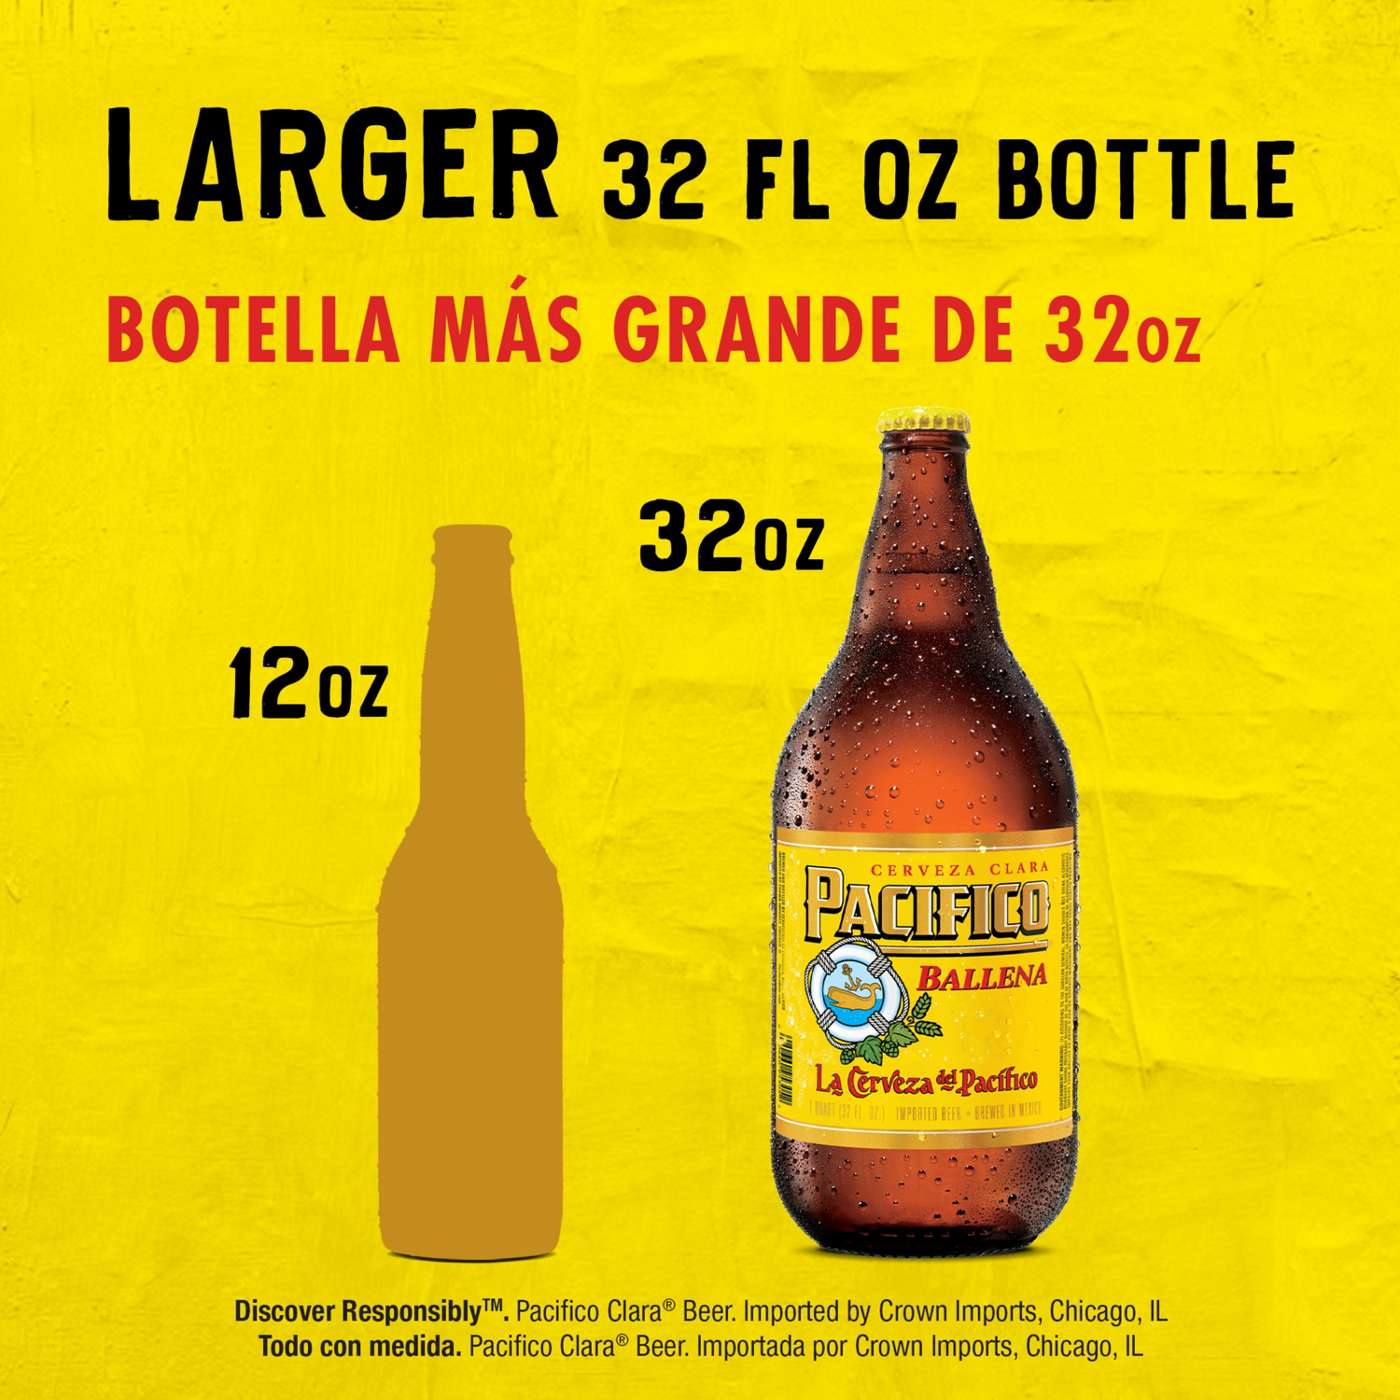 Pacifico Clara Ballena Mexican Lager Import Beer 32 oz Bottle; image 6 of 8